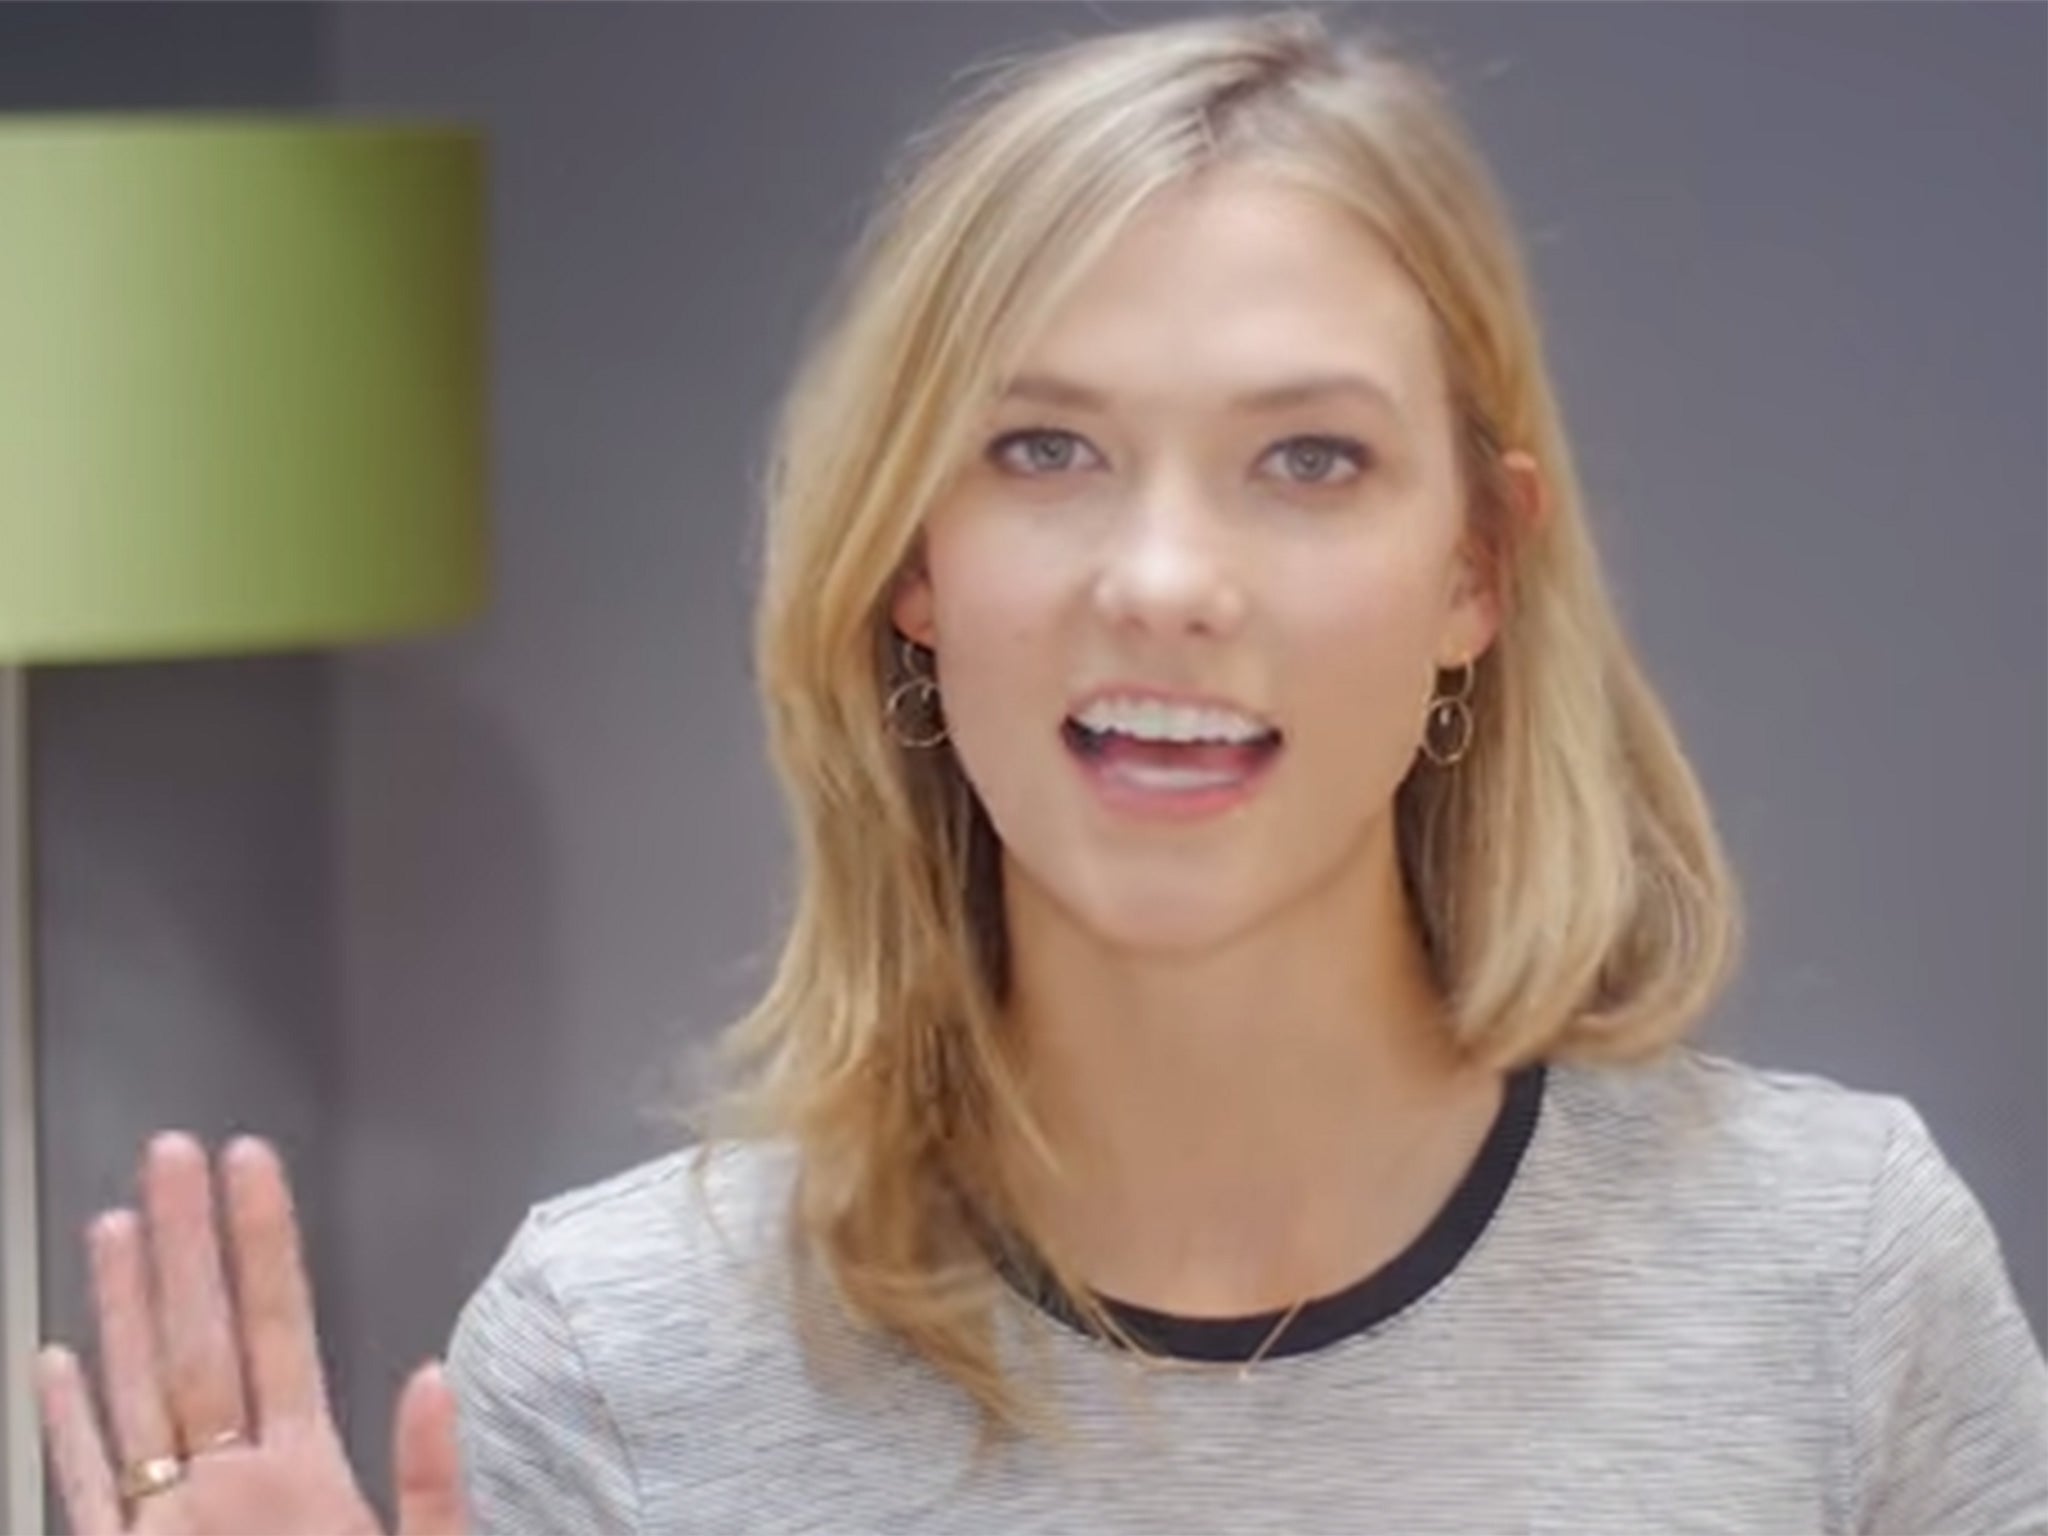 Karlie Kloss launches her YouTube channel